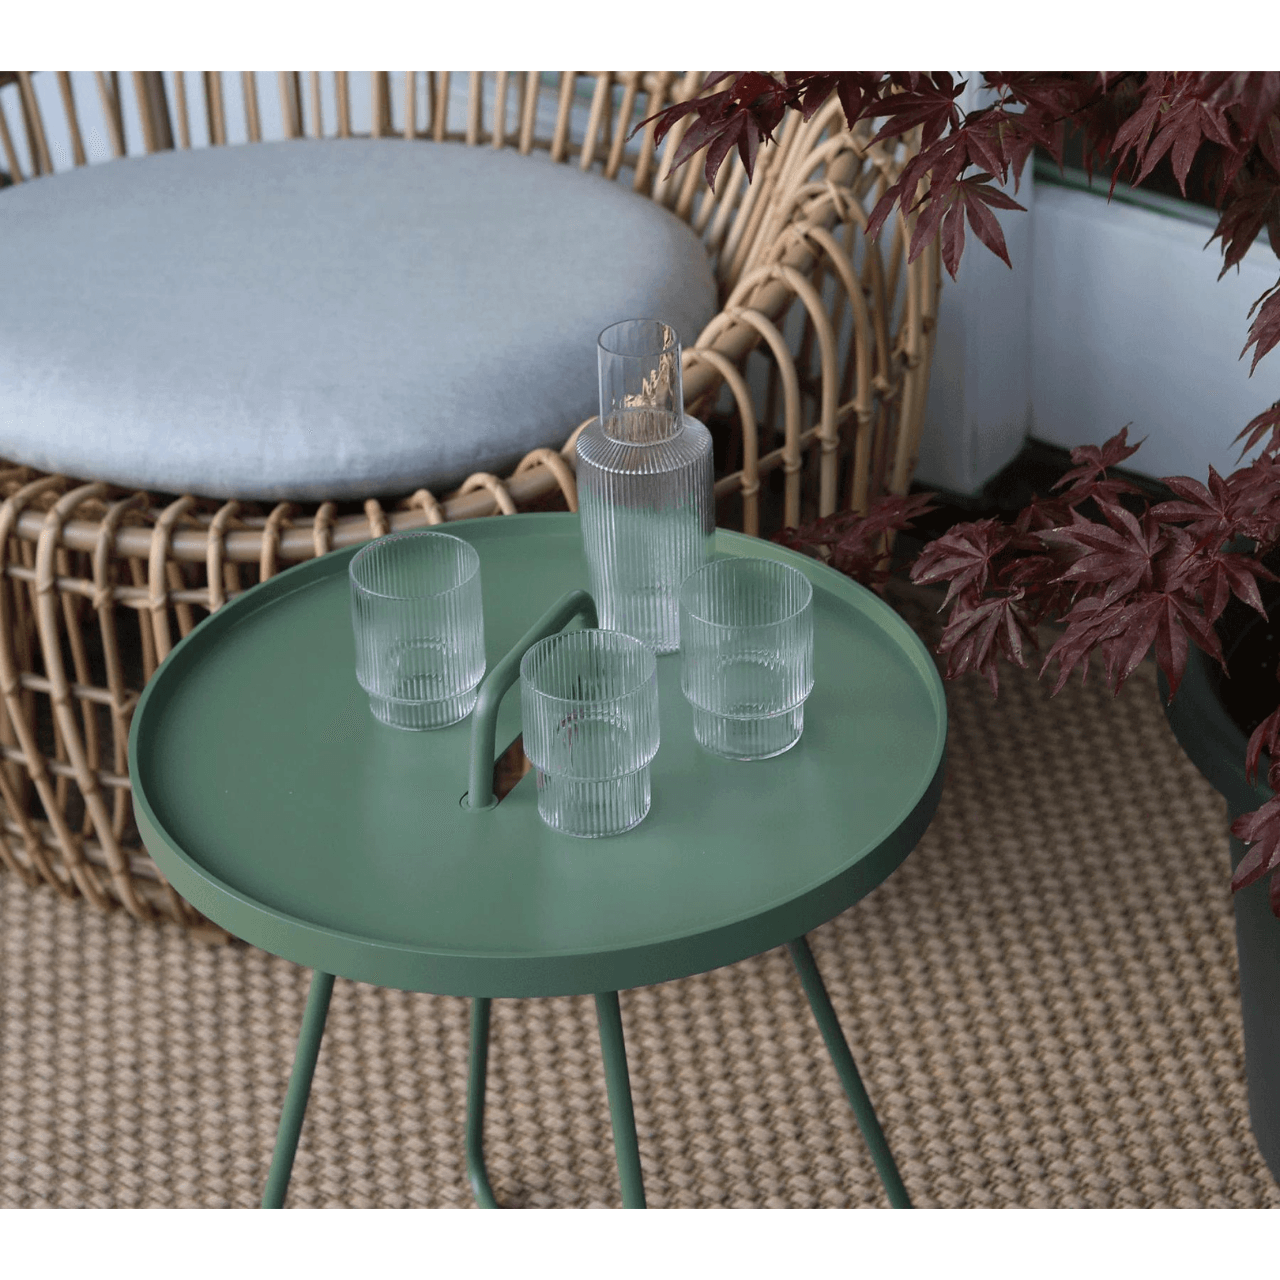 Boxhills On-The-Move olive green outdoor round side table with glasses of water and bottle on it beside outdoor round rattan chair